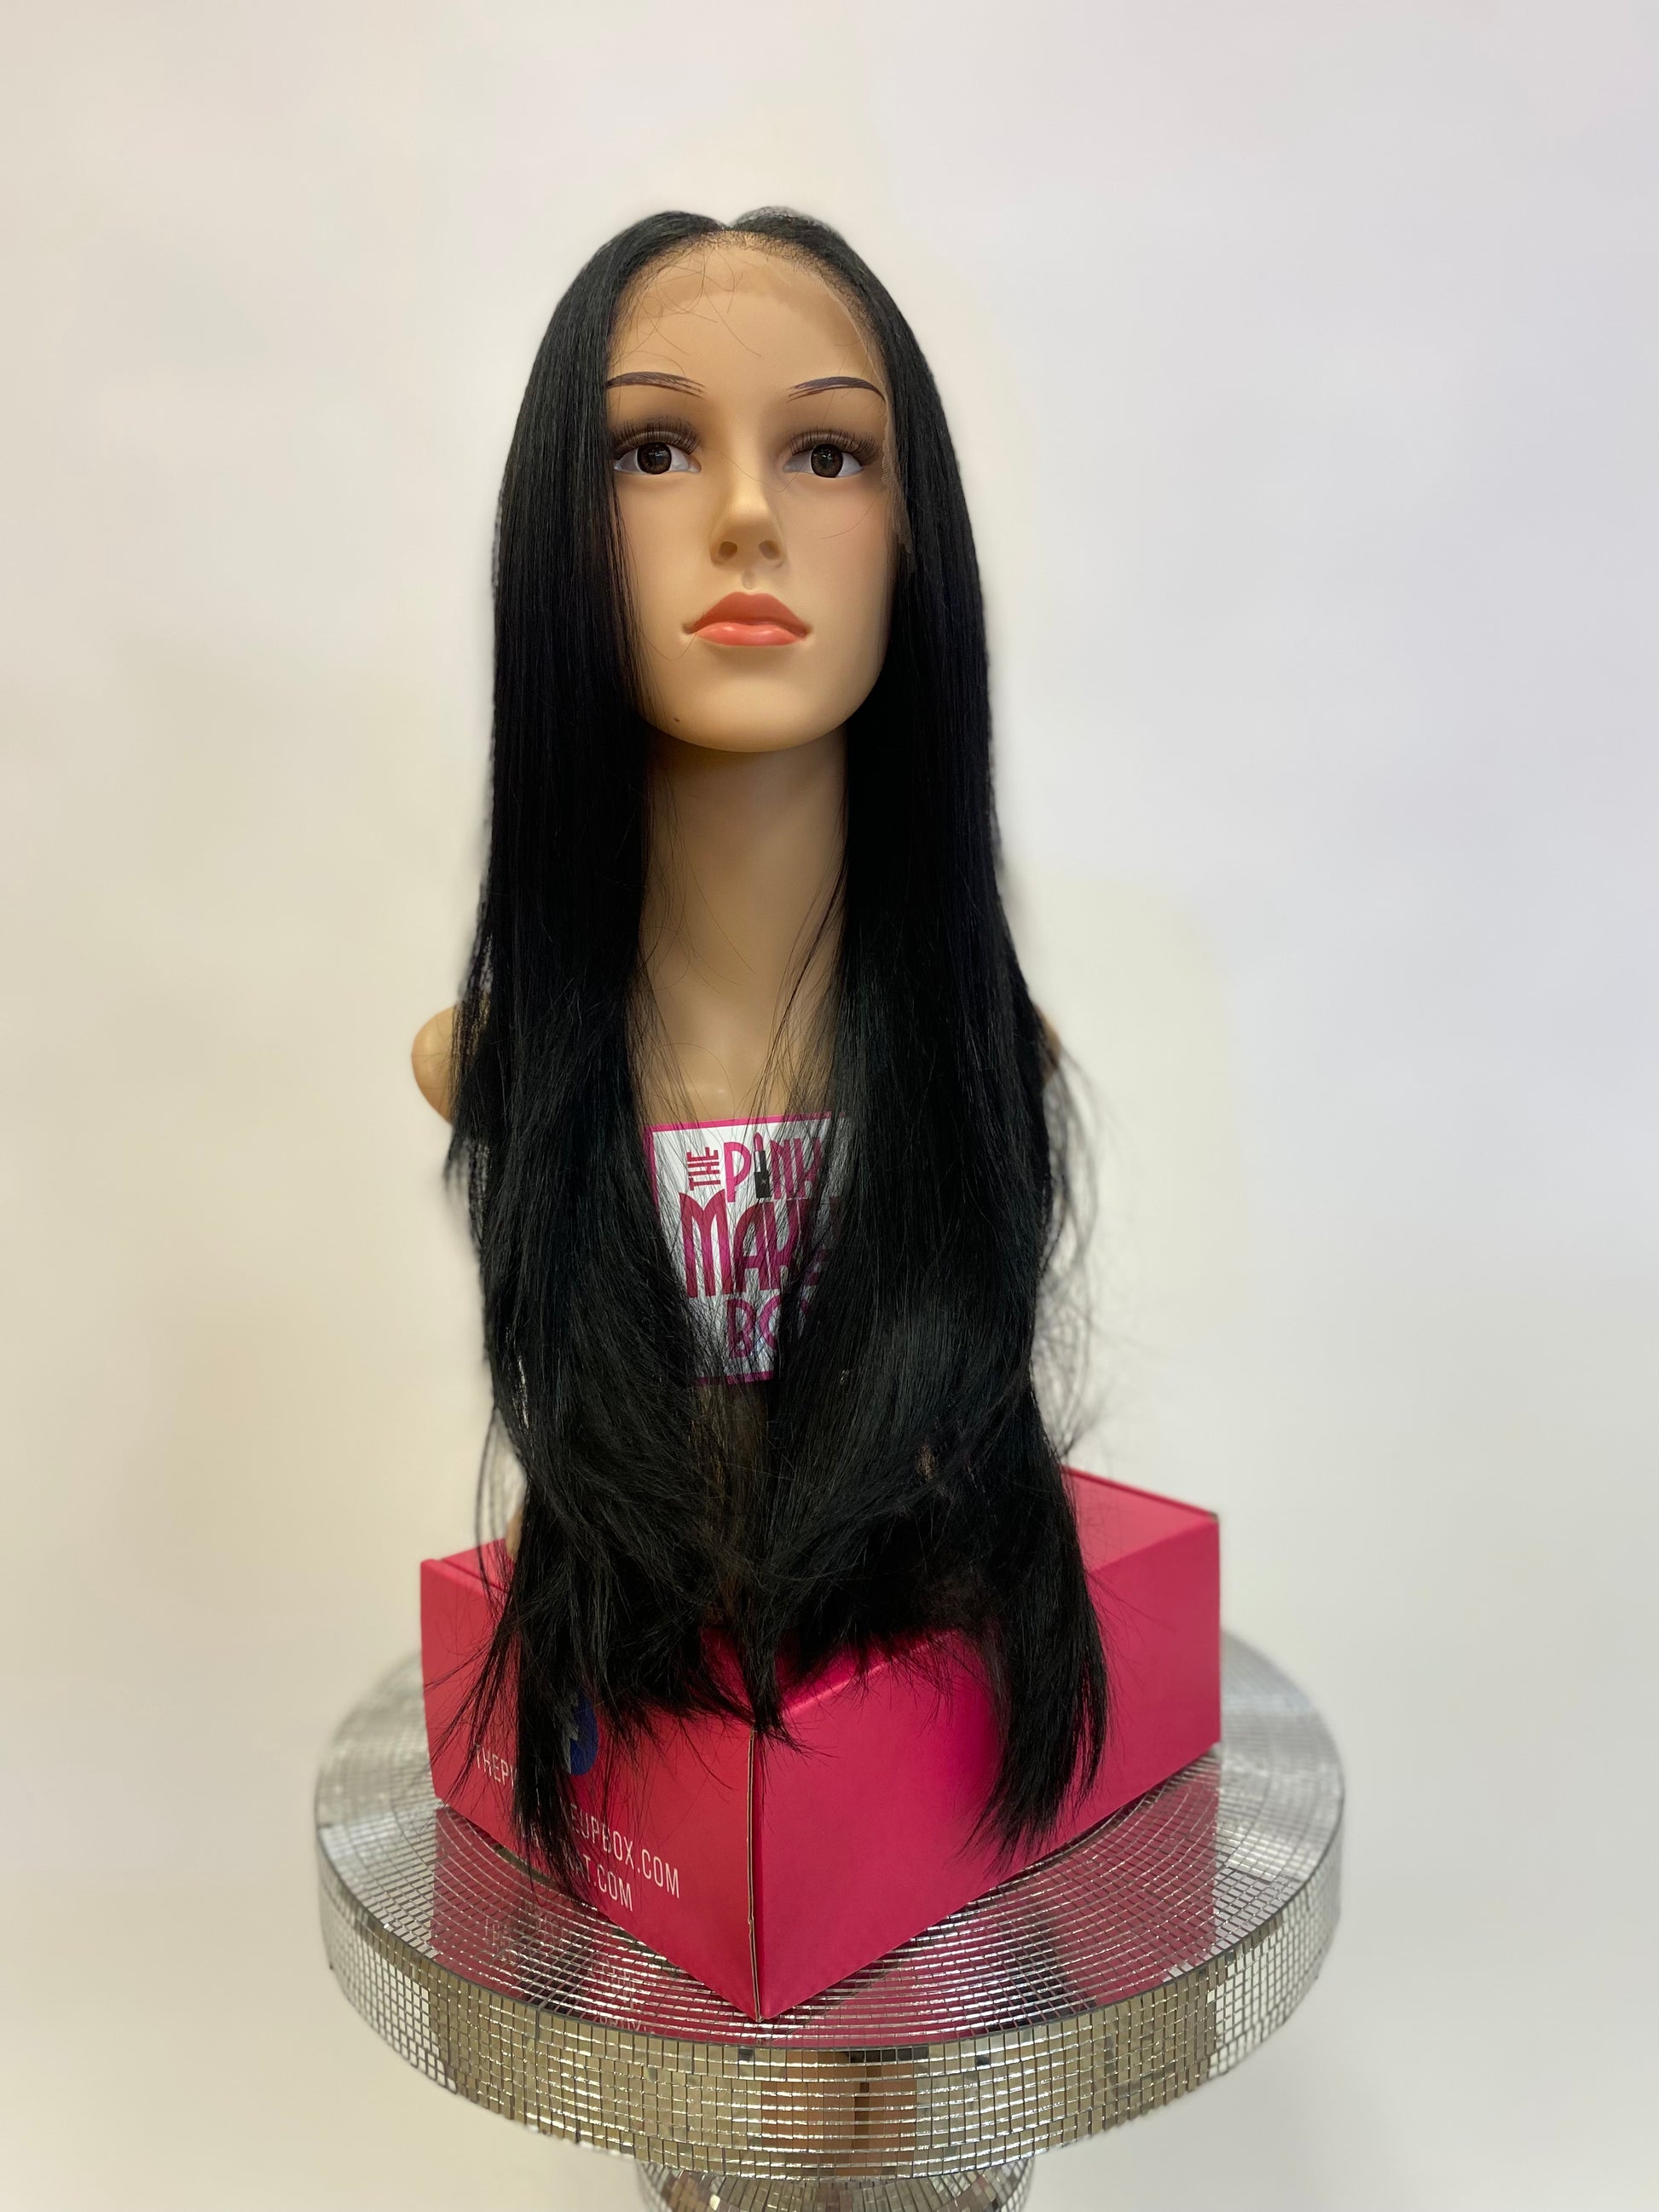 164 Lucy - 13x7 Free Part Lace Front Wig - 1B - DaizyKat Cosmetics 164 Lucy - 13x7 Free Part Lace Front Wig - 1B DaizyKat Cosmetics Wigs